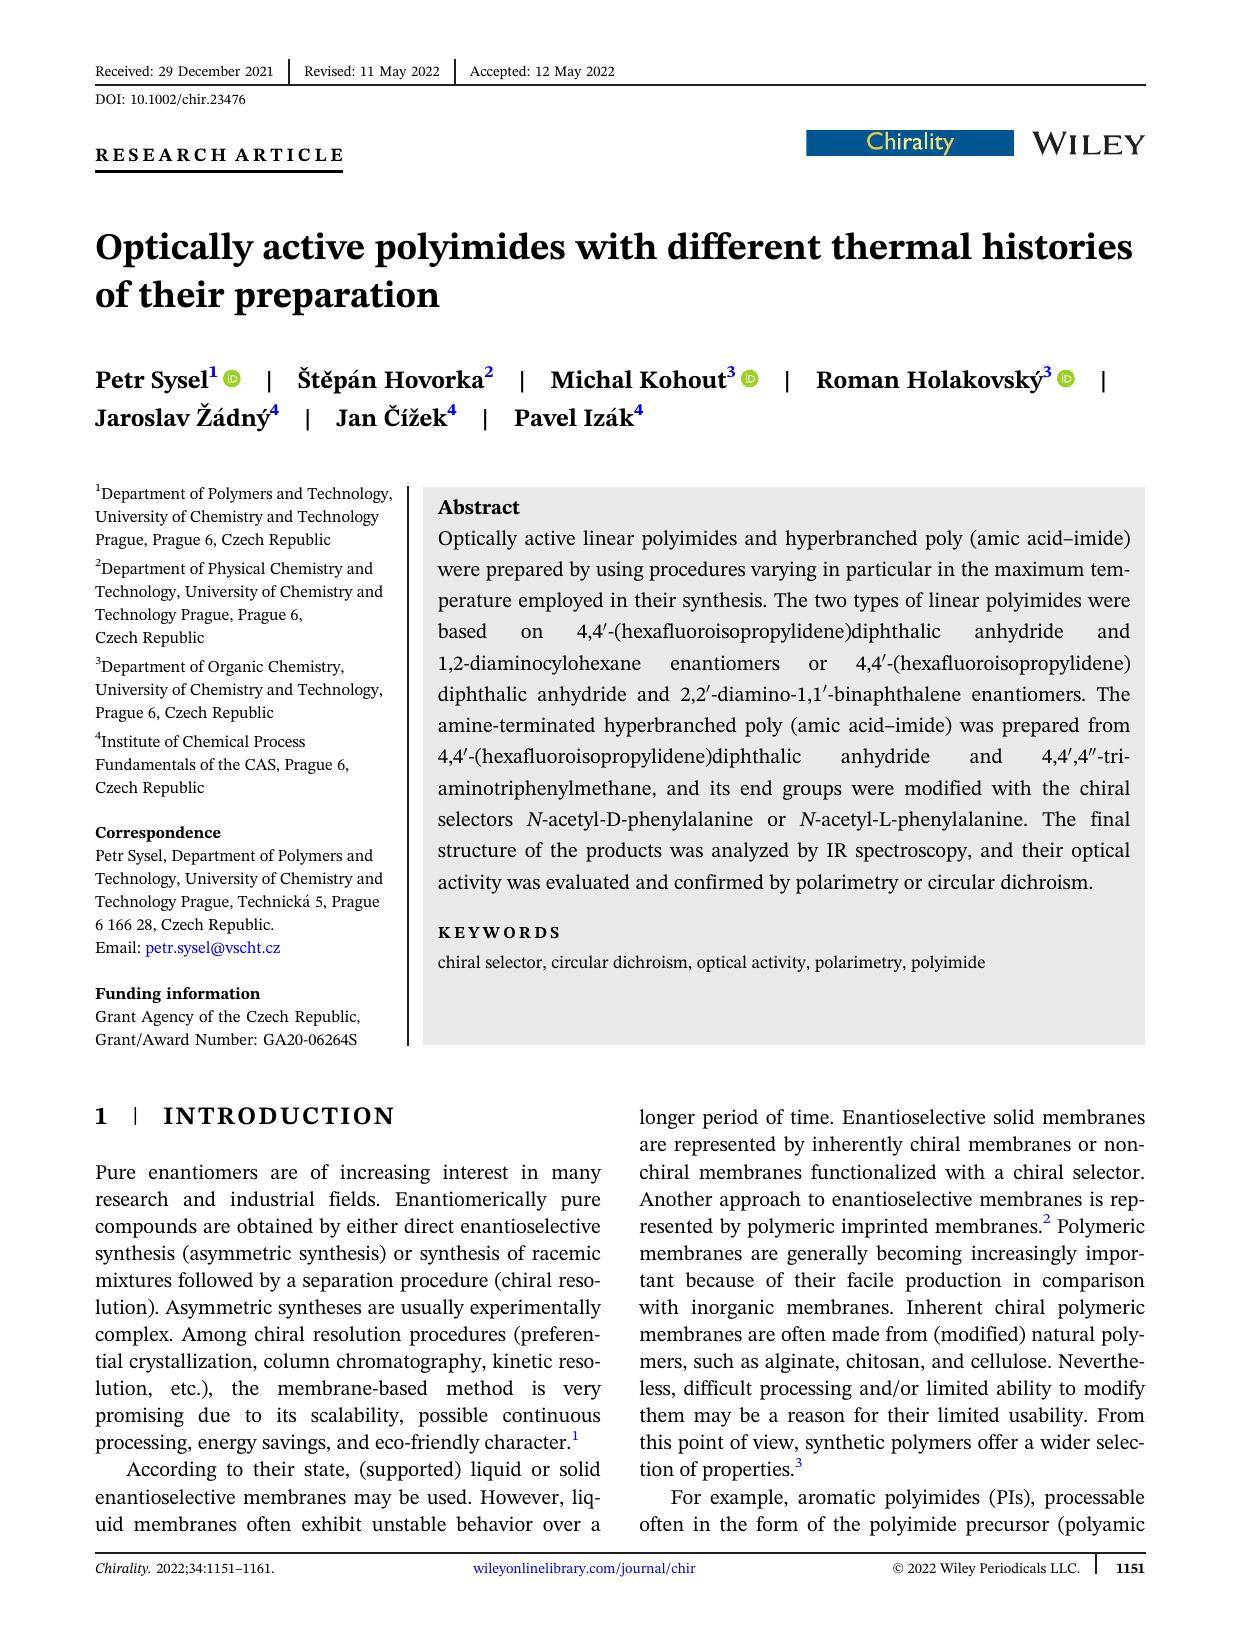 Optically active polyimides with different thermal histories of their preparation by unknow